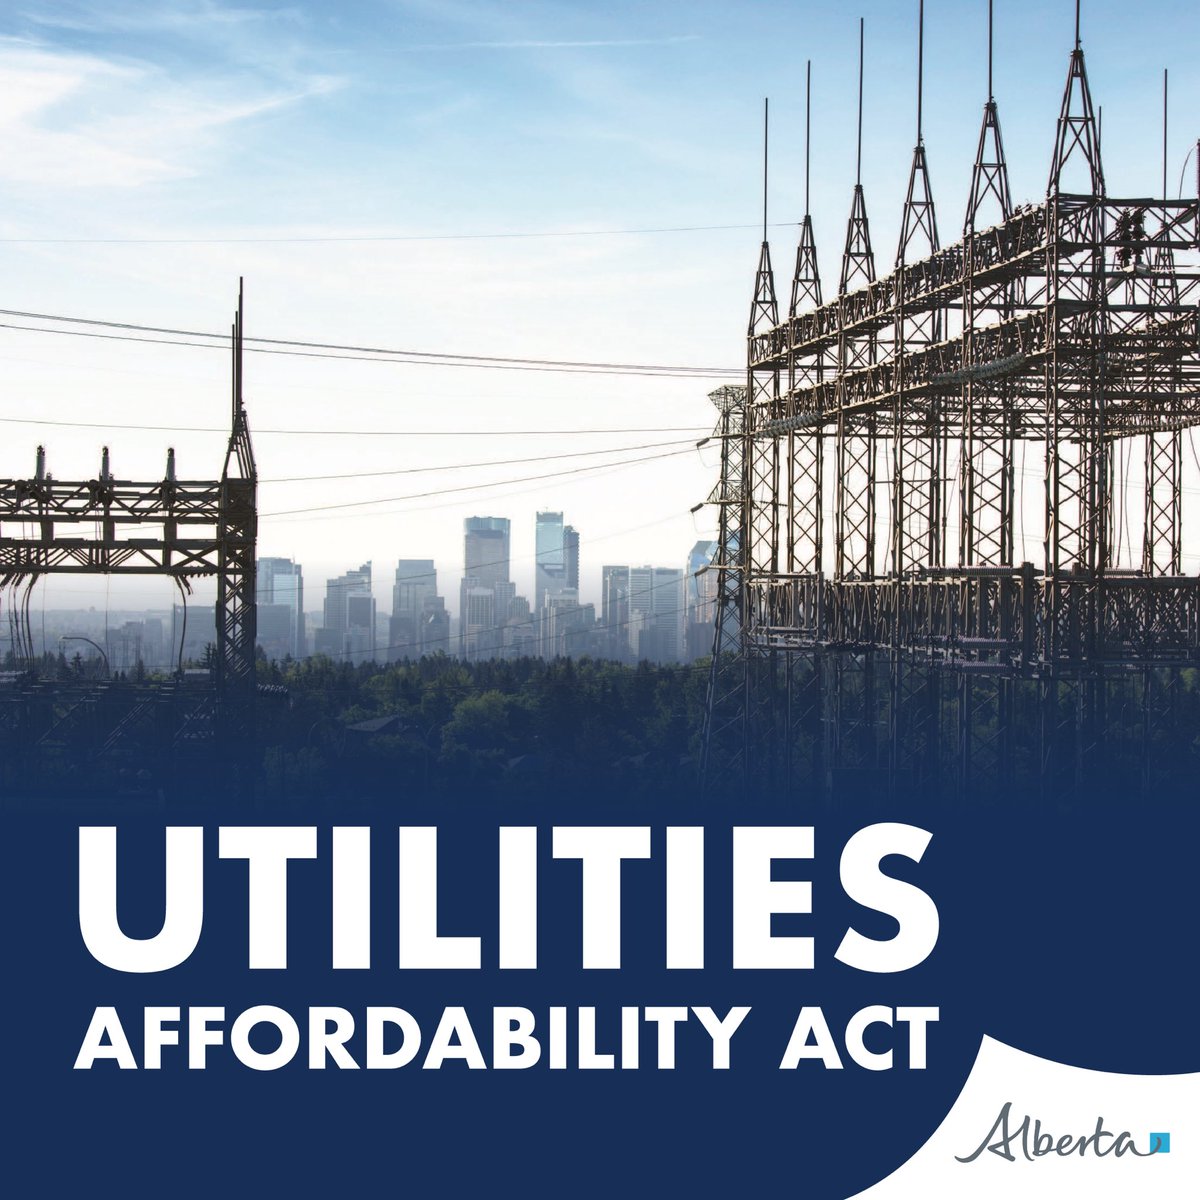 Today, I tabled the Utilities Affordability Statutes Amendment Act. If passed, this legislation would reduce the pressure on Albertans’ utility bills by ensuring long-term affordability and predictability for local access fees. It is unacceptable for municipalities to be raking